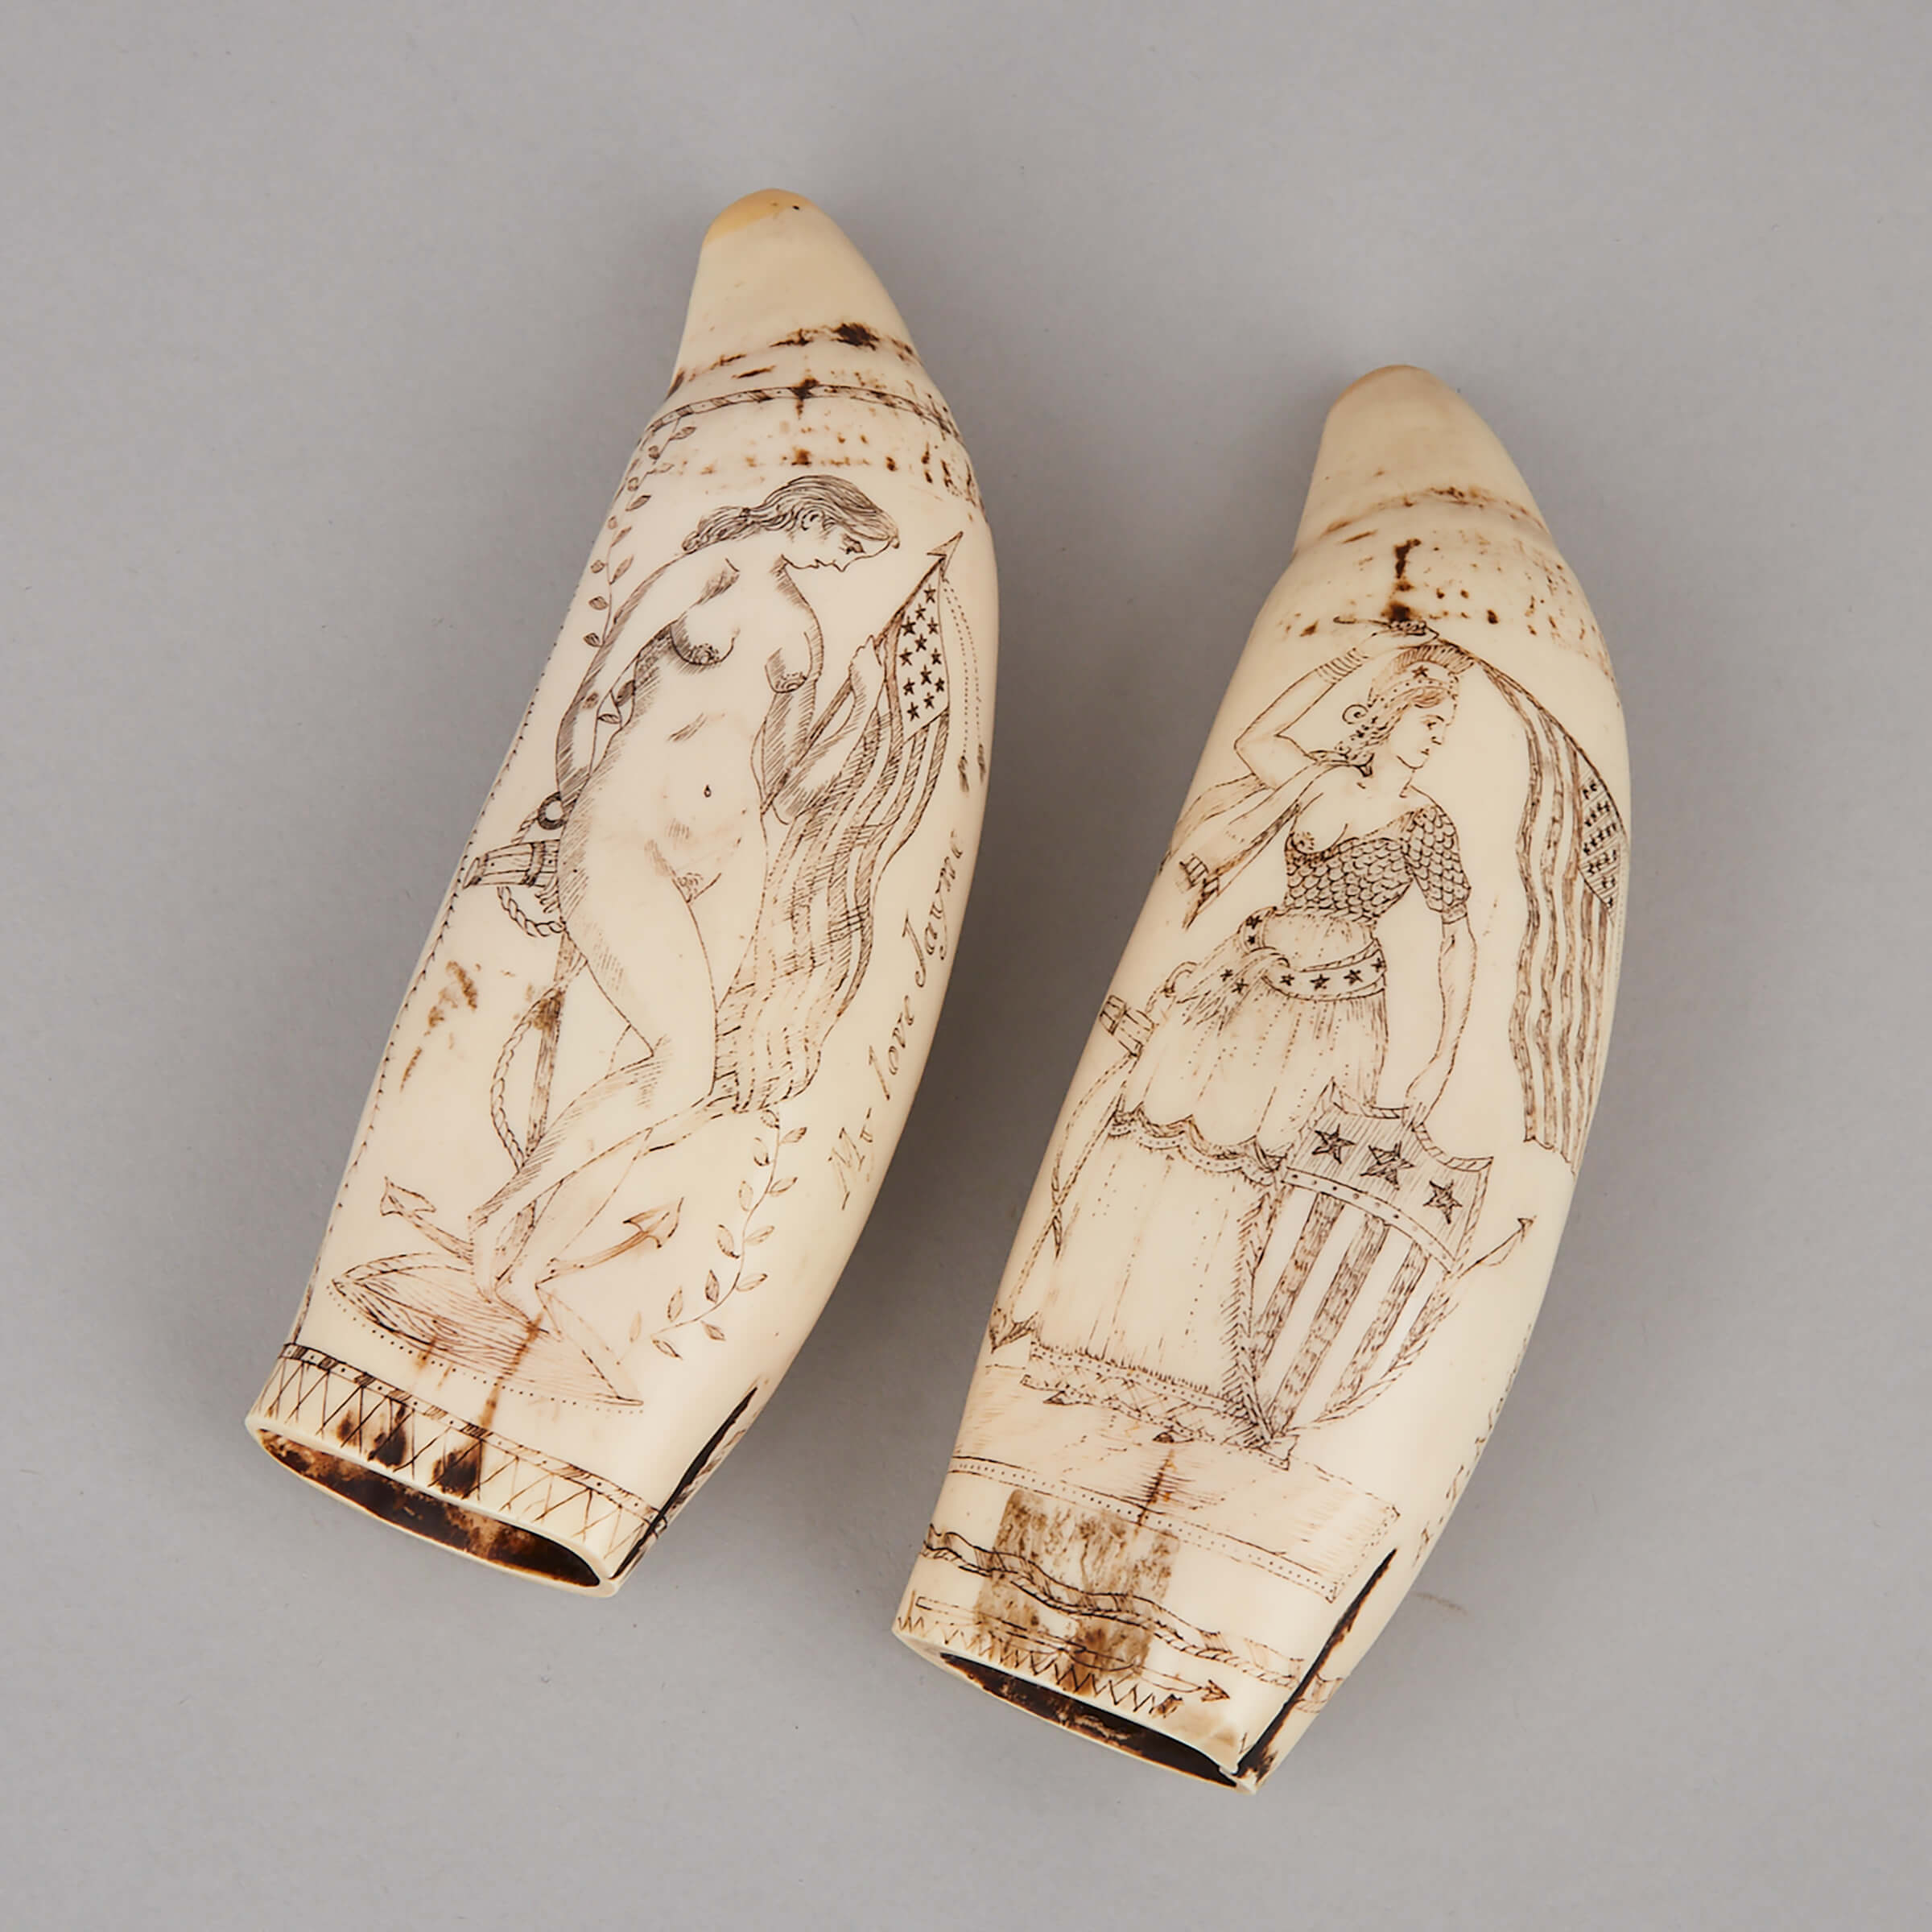 Two Replica Scrimshaw Resin ‘Whale’s Teeth’, 20th century